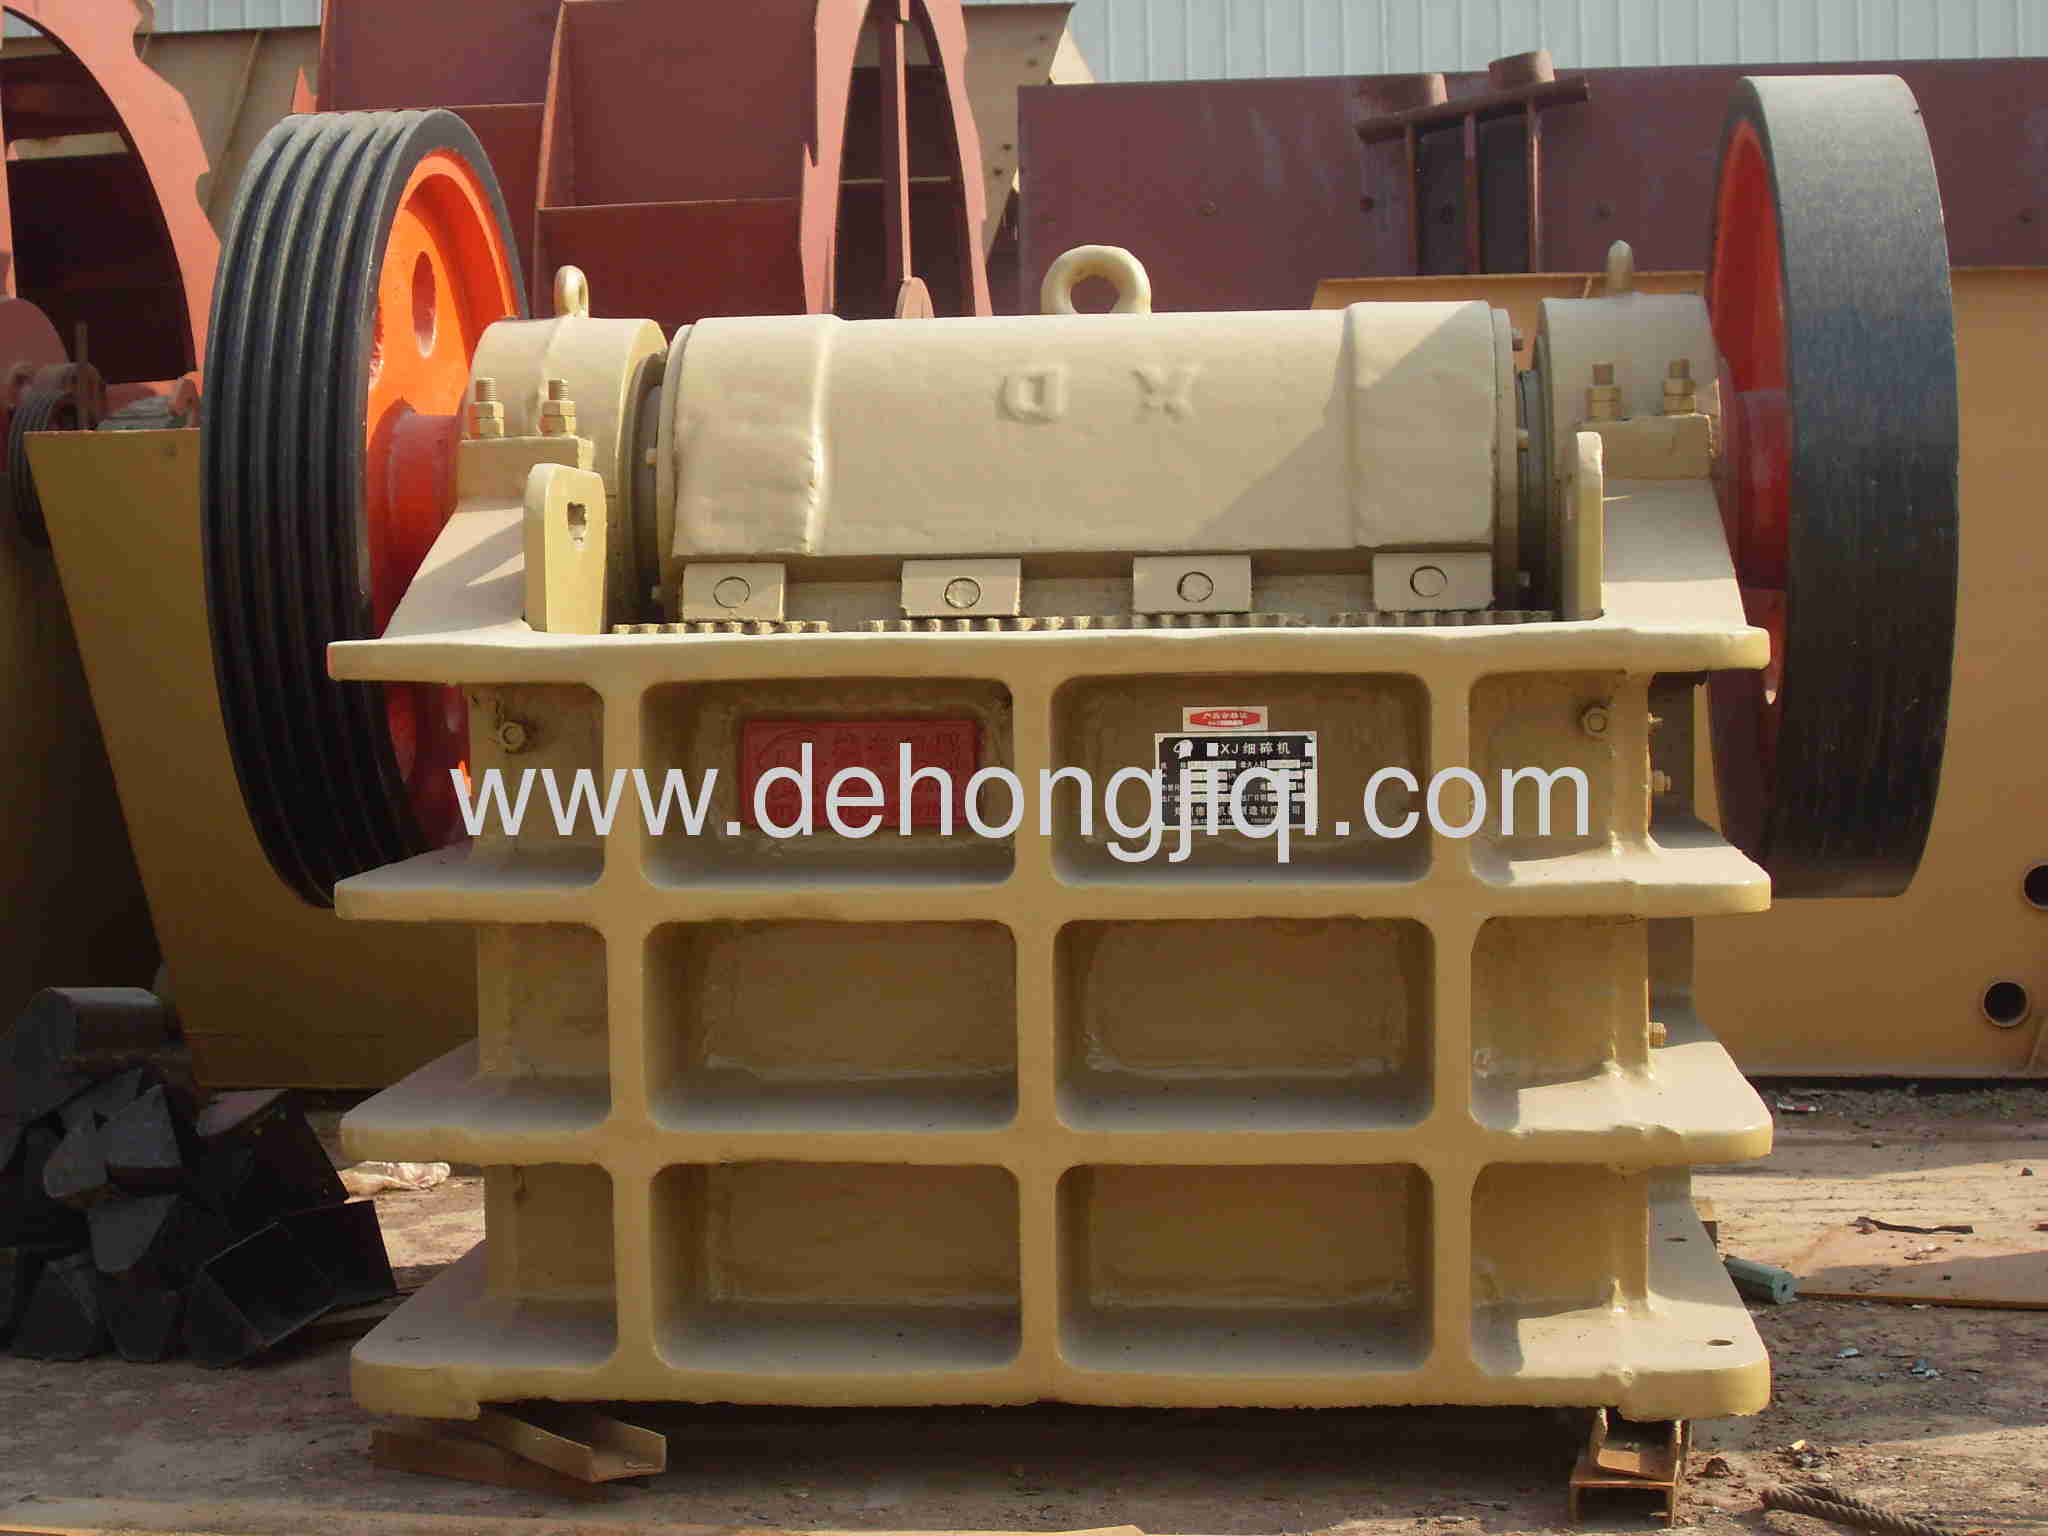 Our best sale machine: jaw crusher